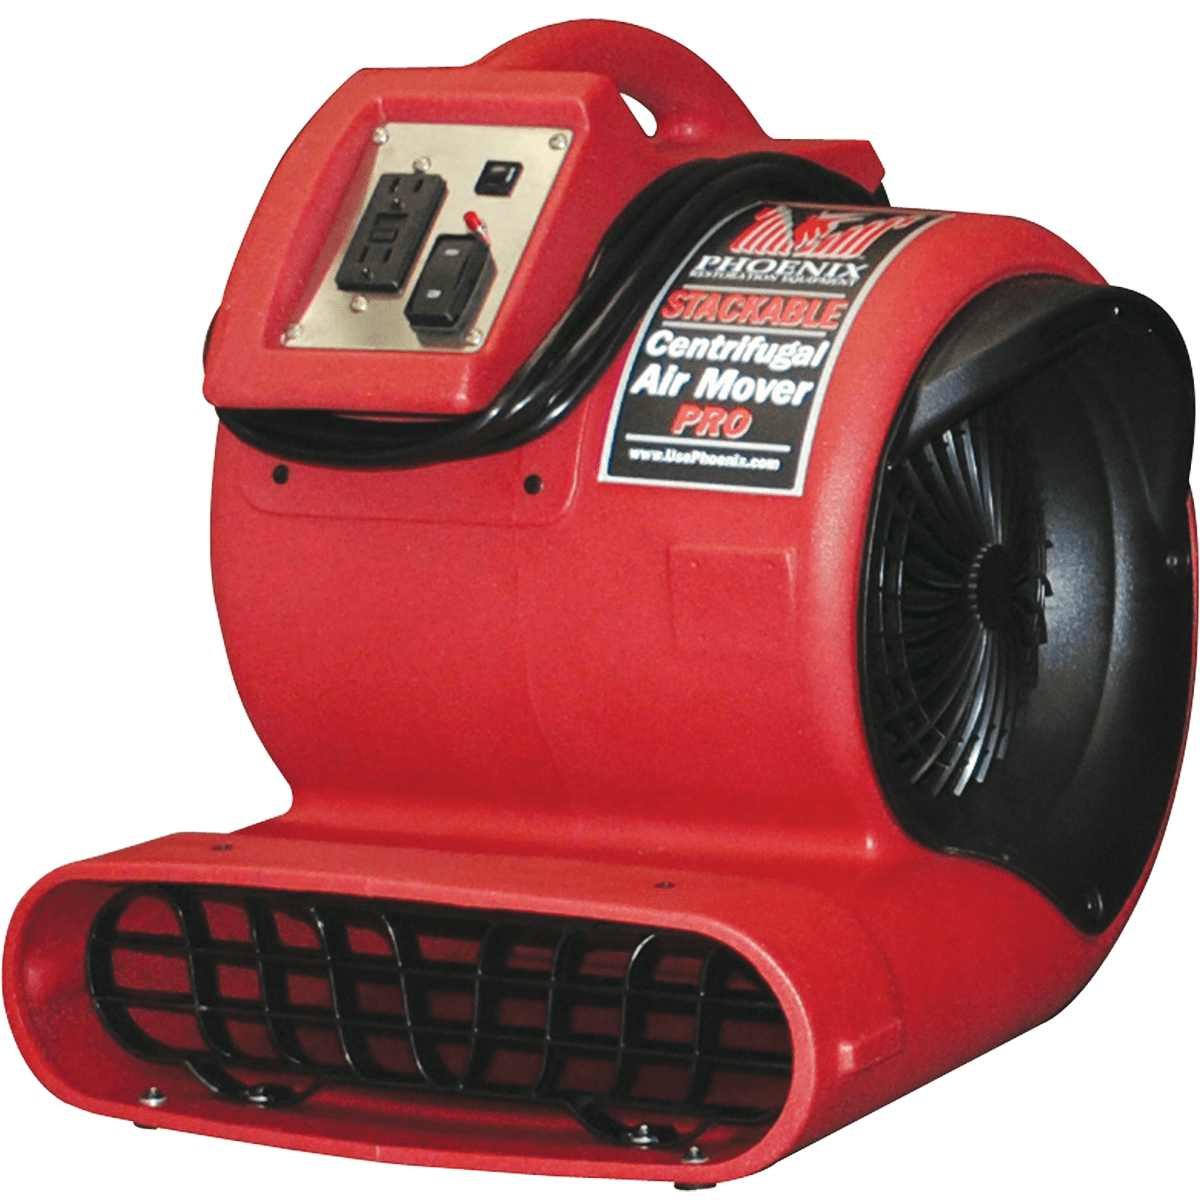 Phoenix Stackable Cam Pro Centrifugal Air Mover